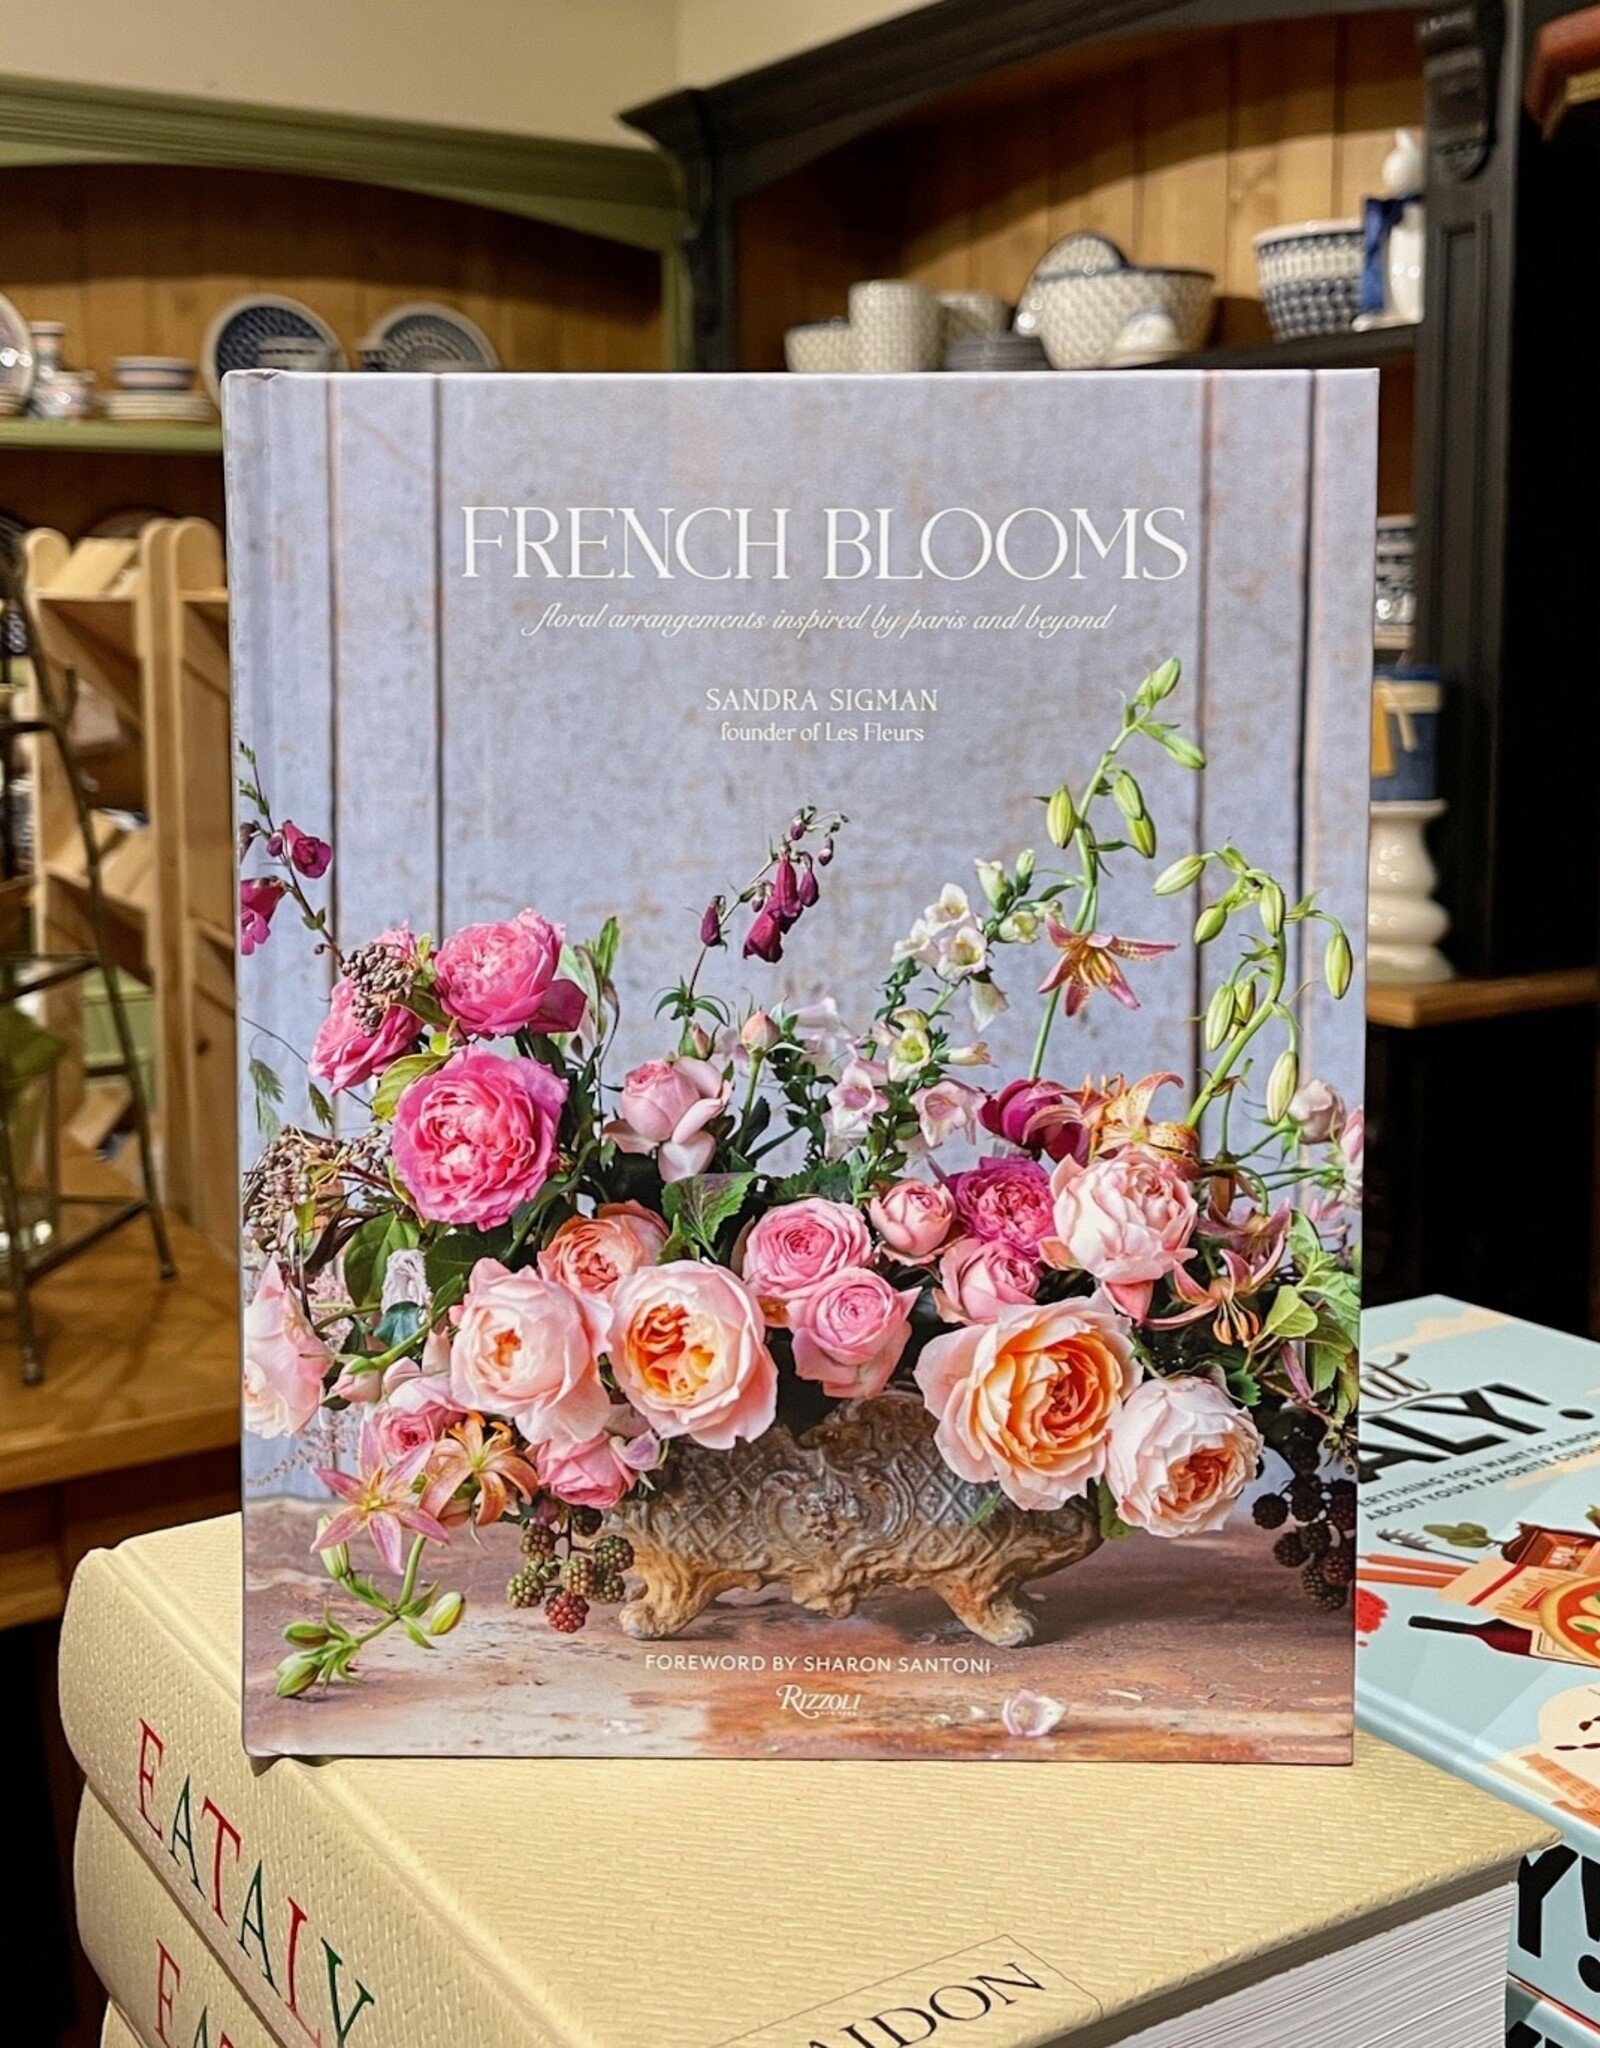 French Blooms by Sandra Sigman